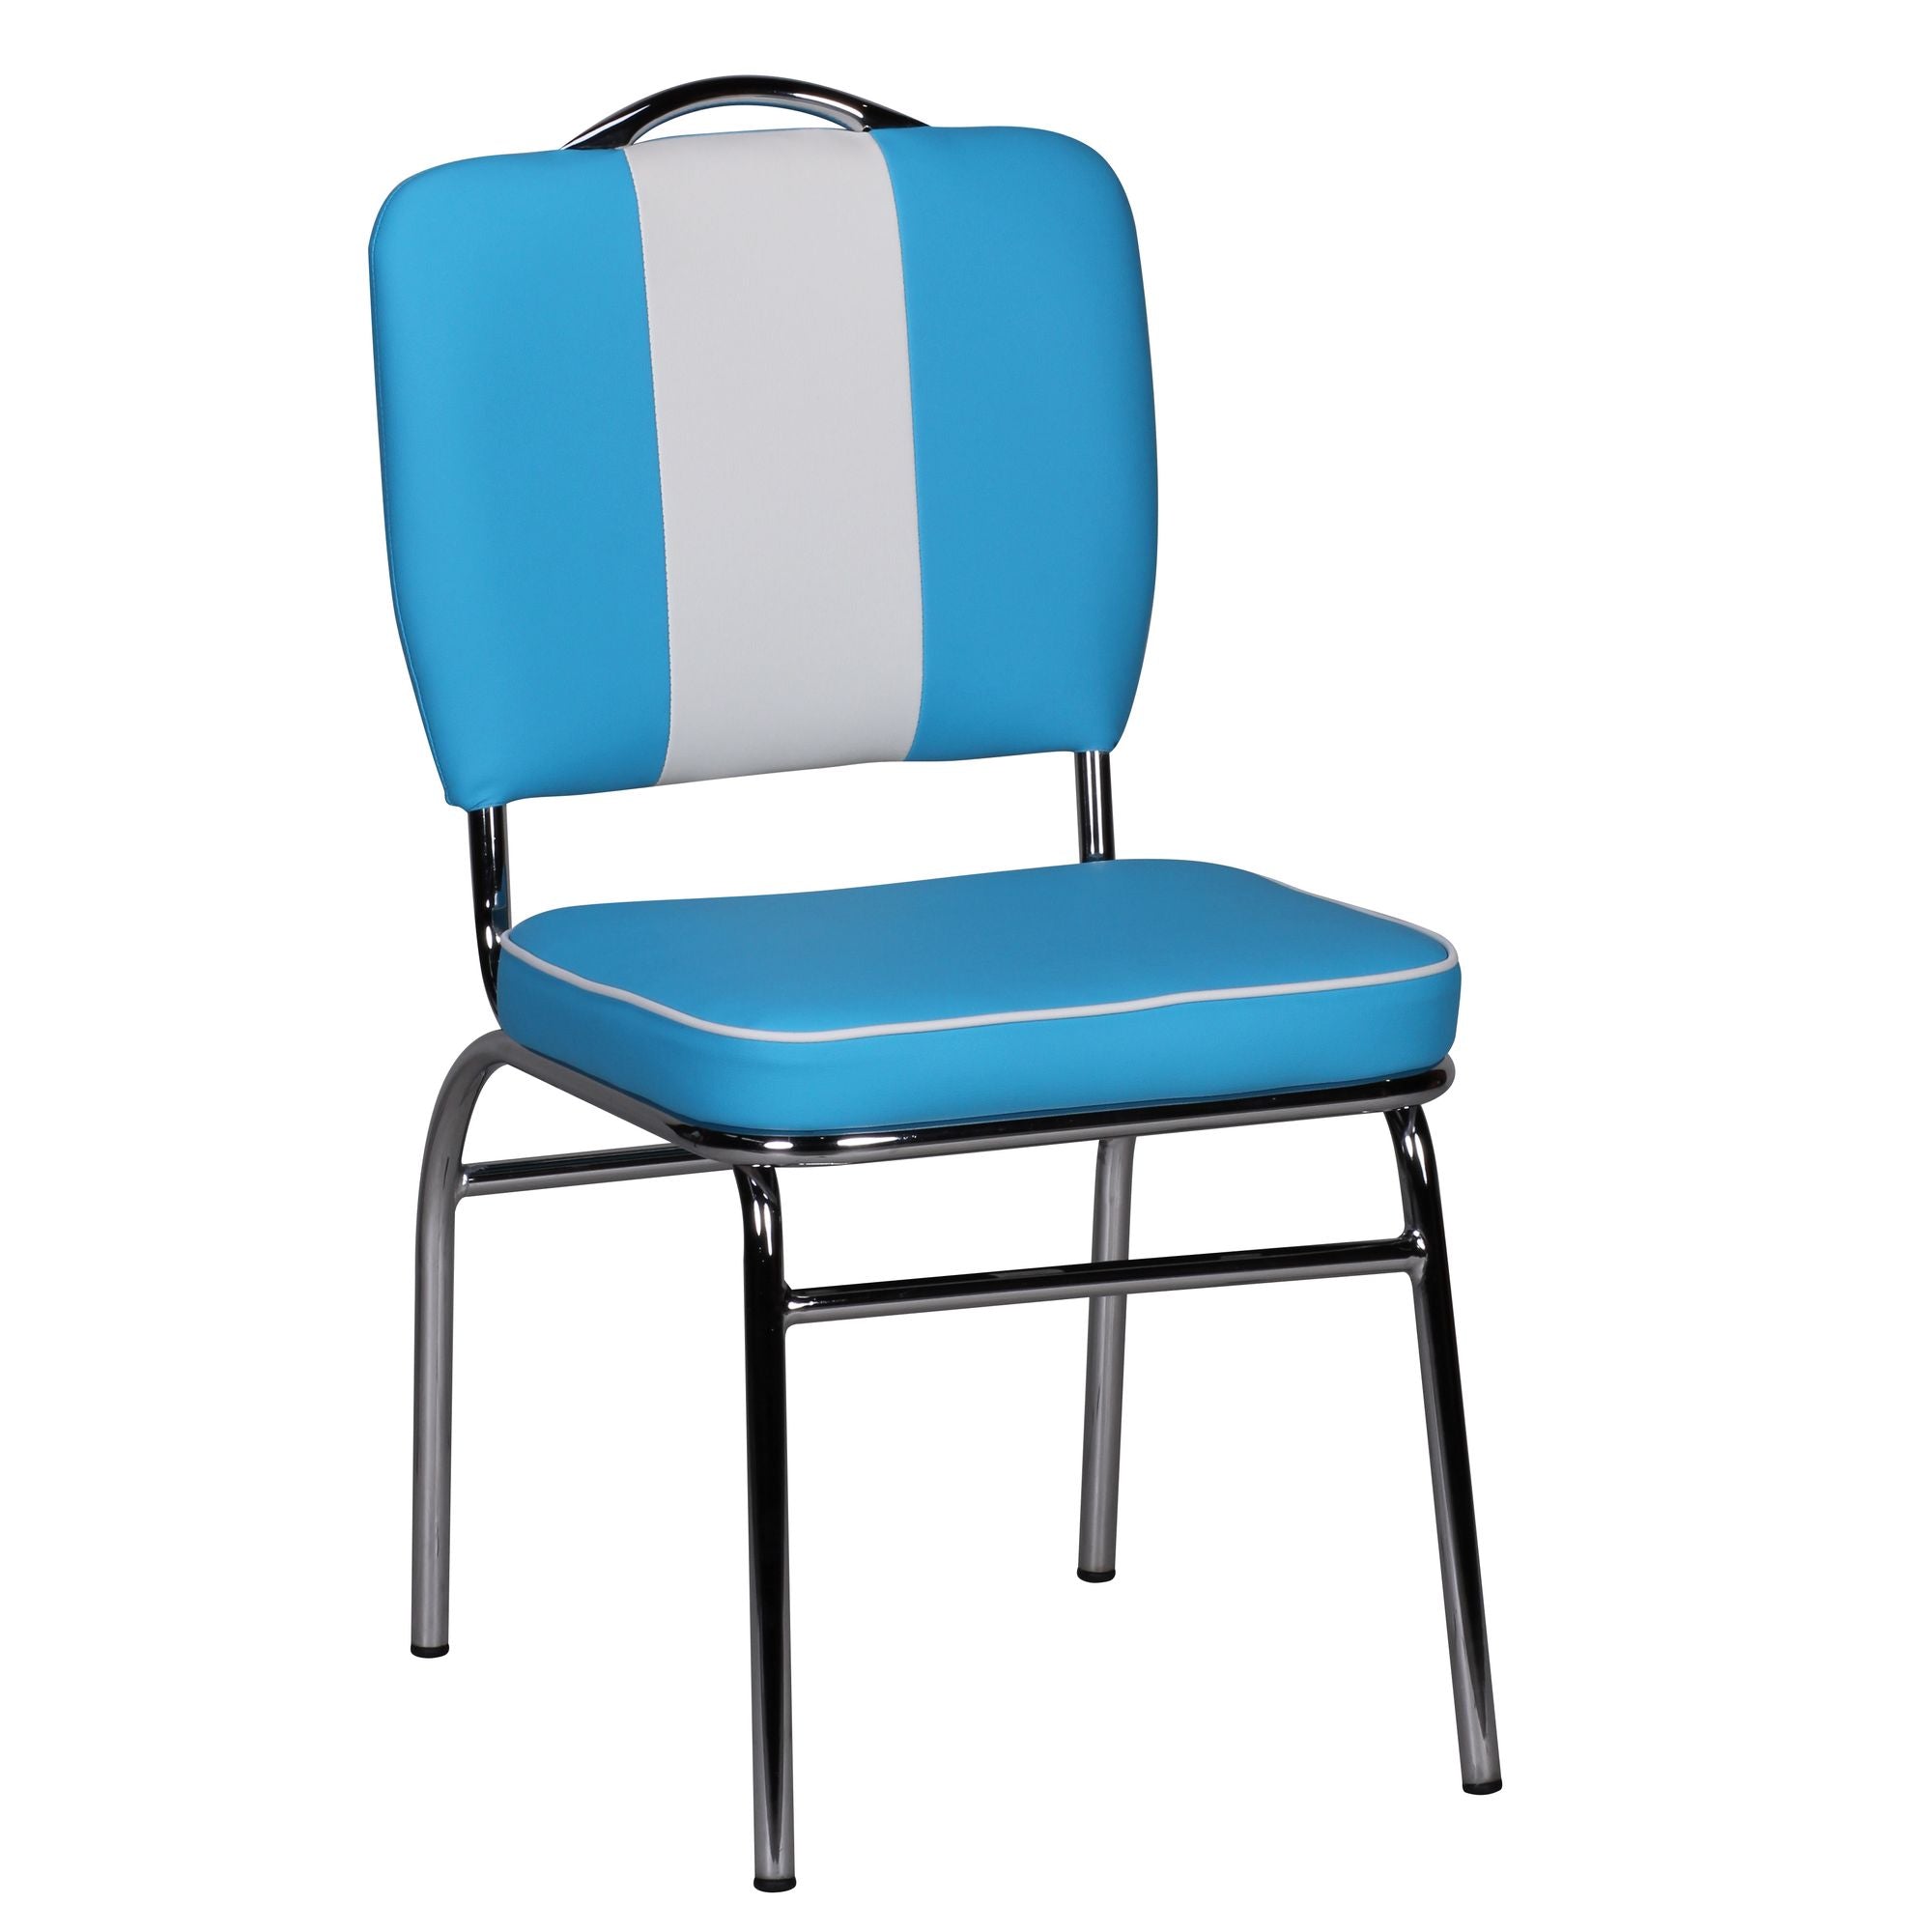 Nancy's Retro Dining Room Chair - Dining Room Chairs - Dining Chairs - Chrome - Faux Leather - Blue - White - Black 